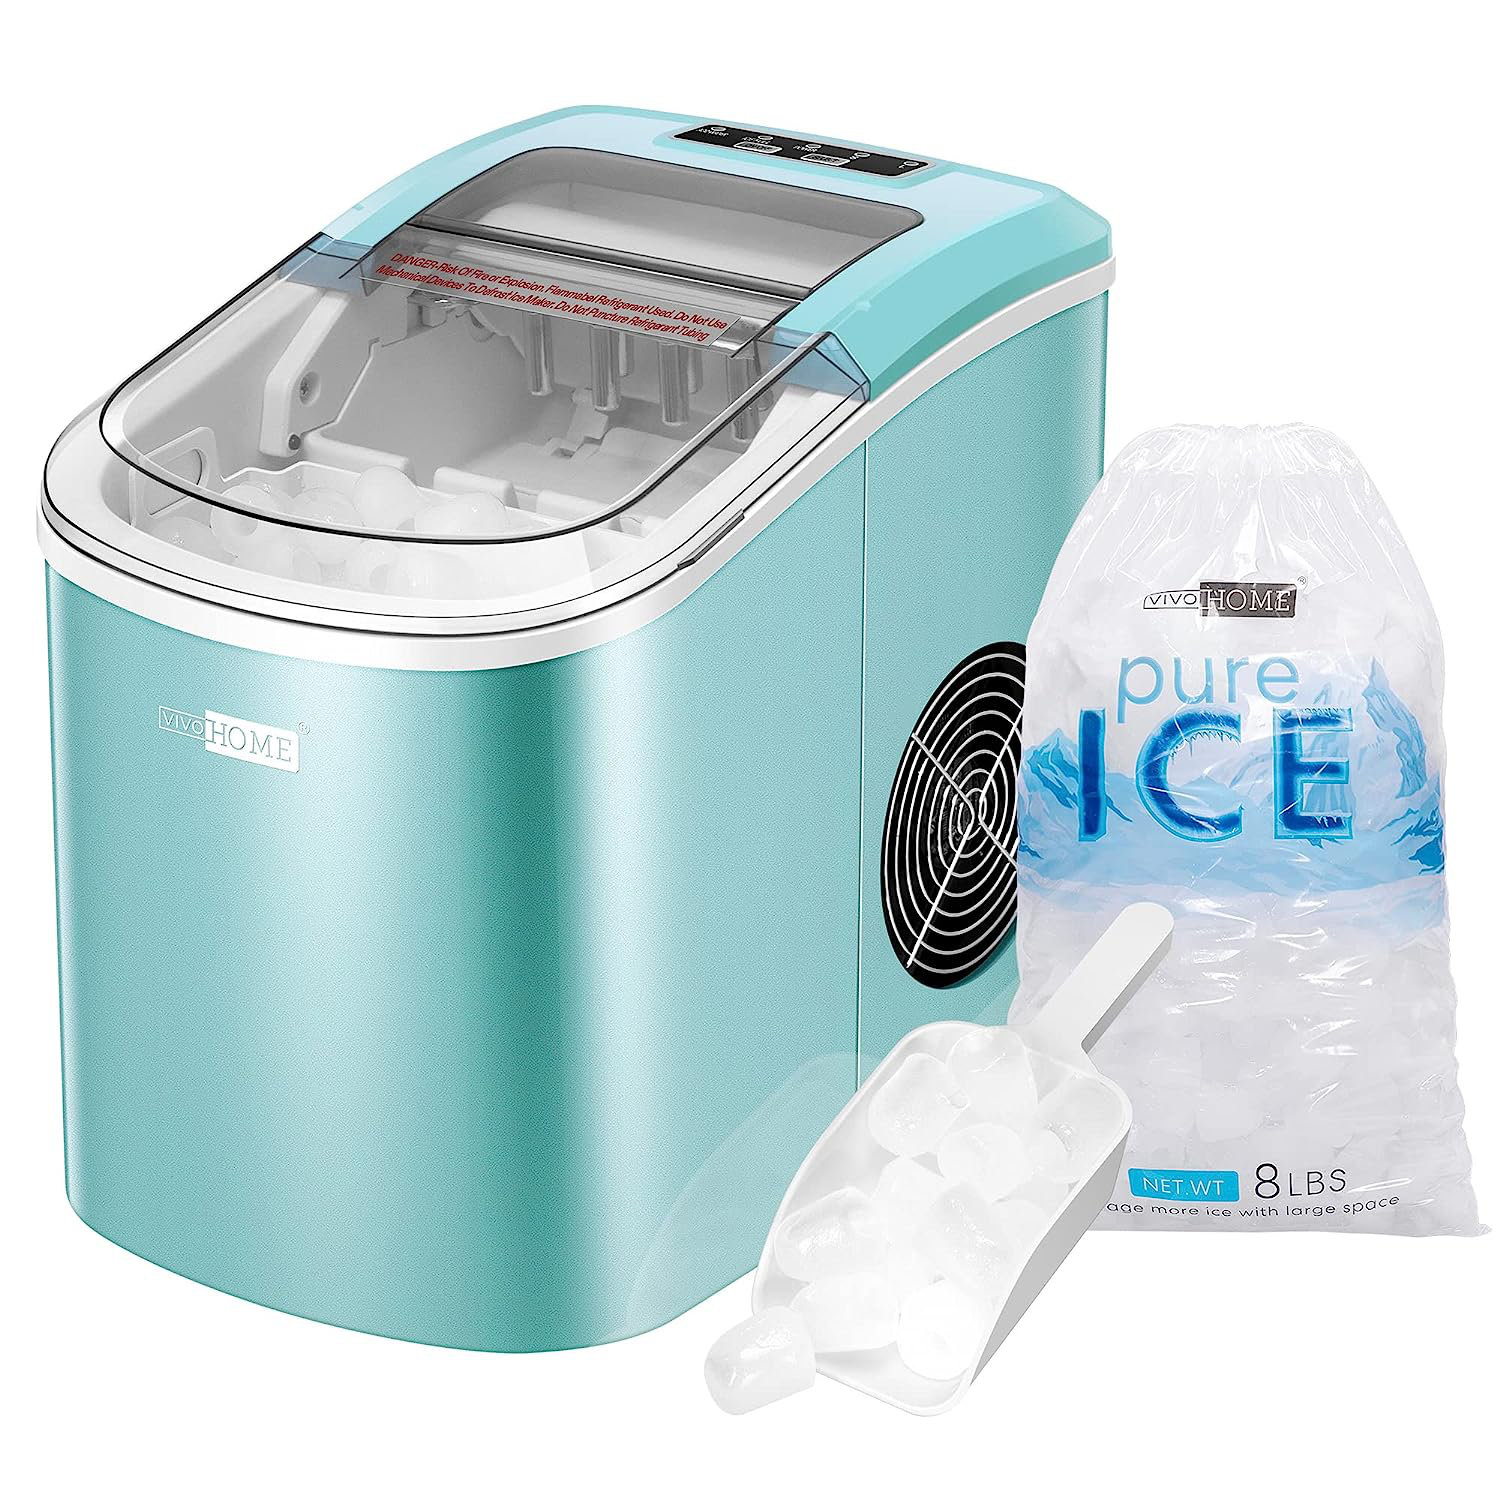 VIVOHOME Ice Cube Maker Countertop Machine with Self Cleaning Function, VIVOHOME